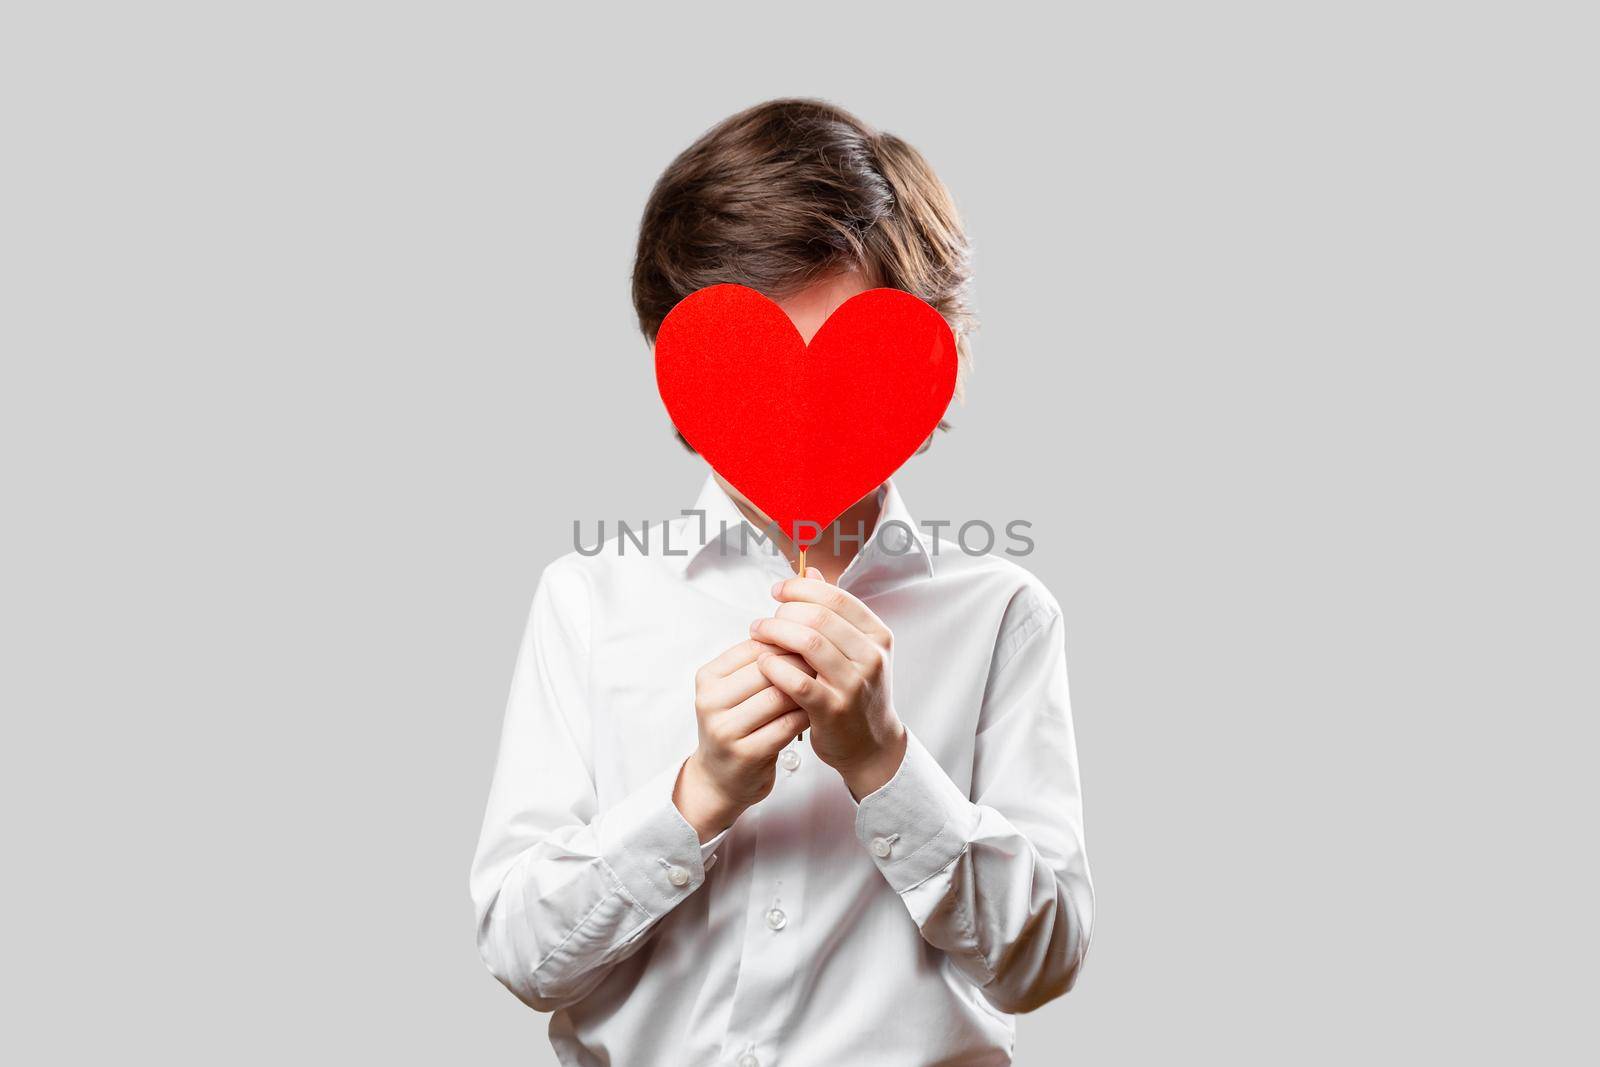 Boy hiding his face behind red st. valentines heart. Stylish young man wearing white shirt over grey background. Saint Valentines Day holiday concept